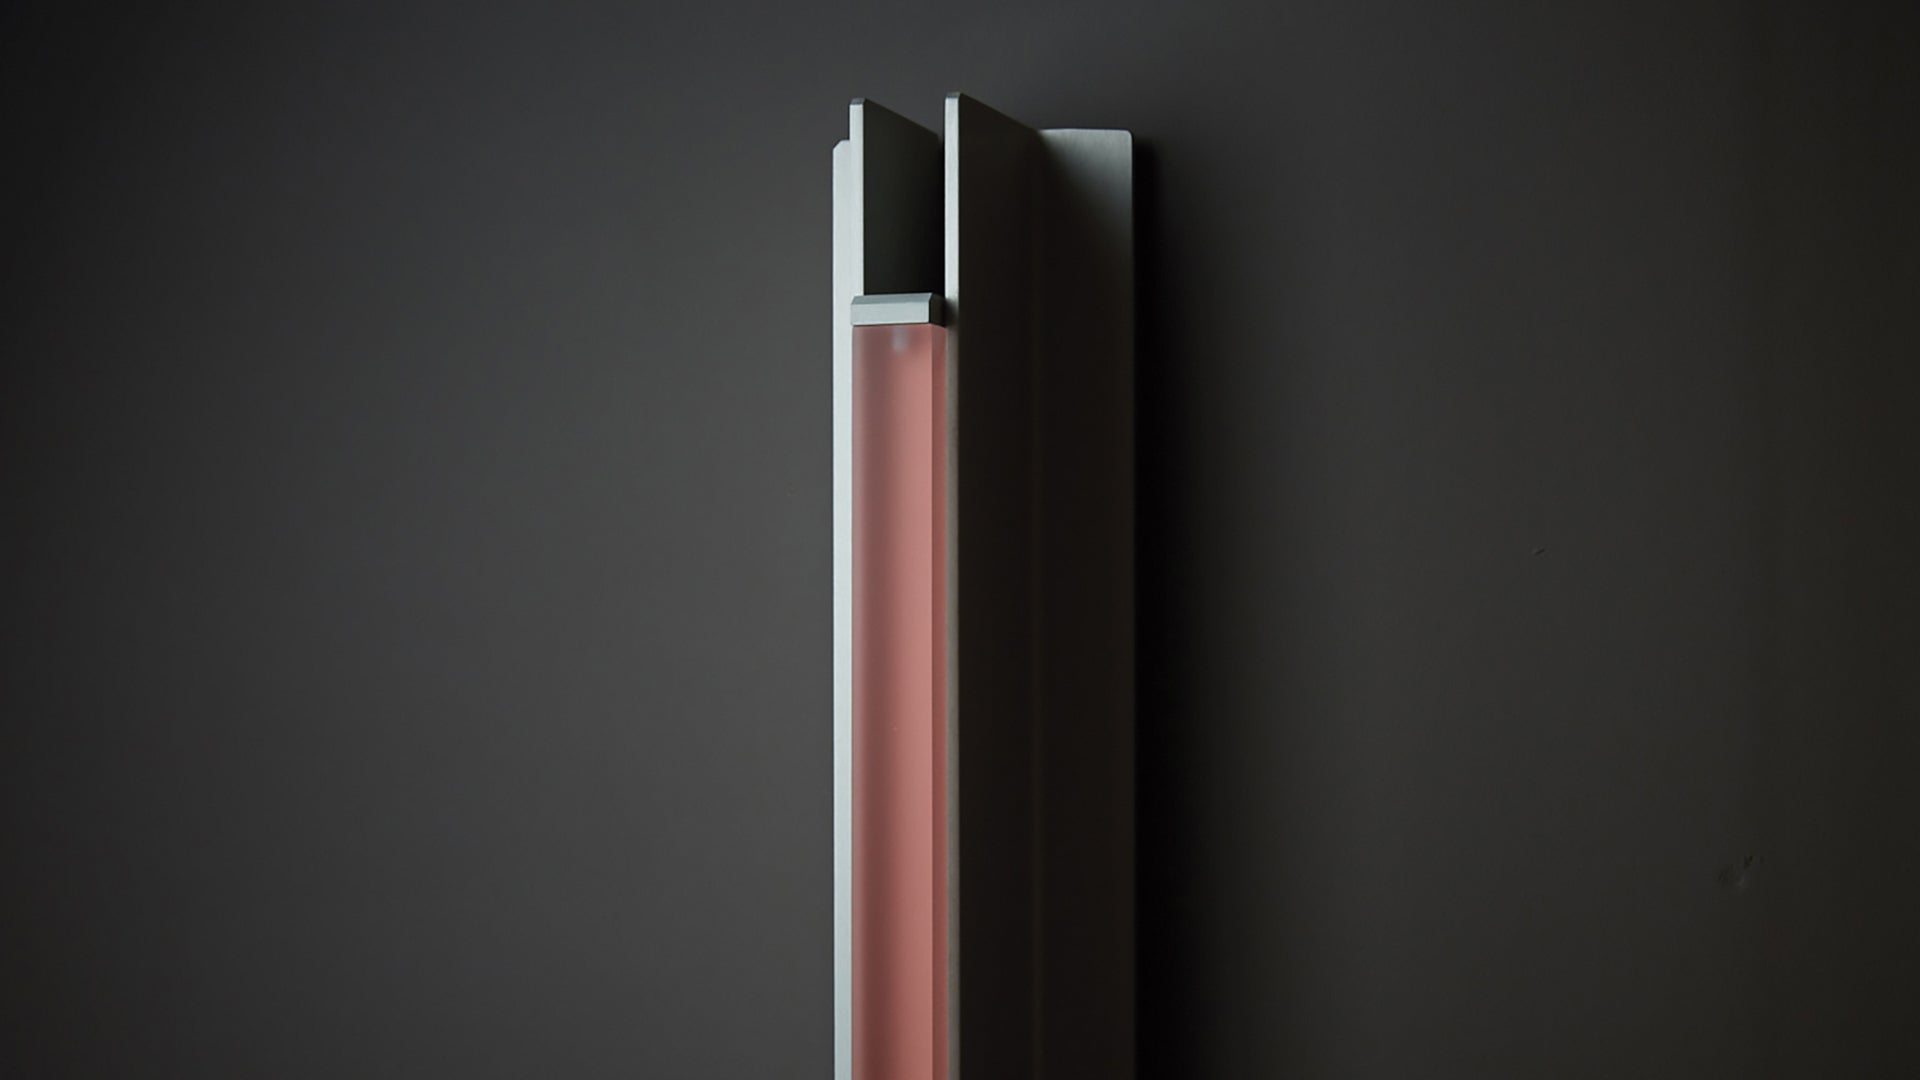 Beam Sconce Collection